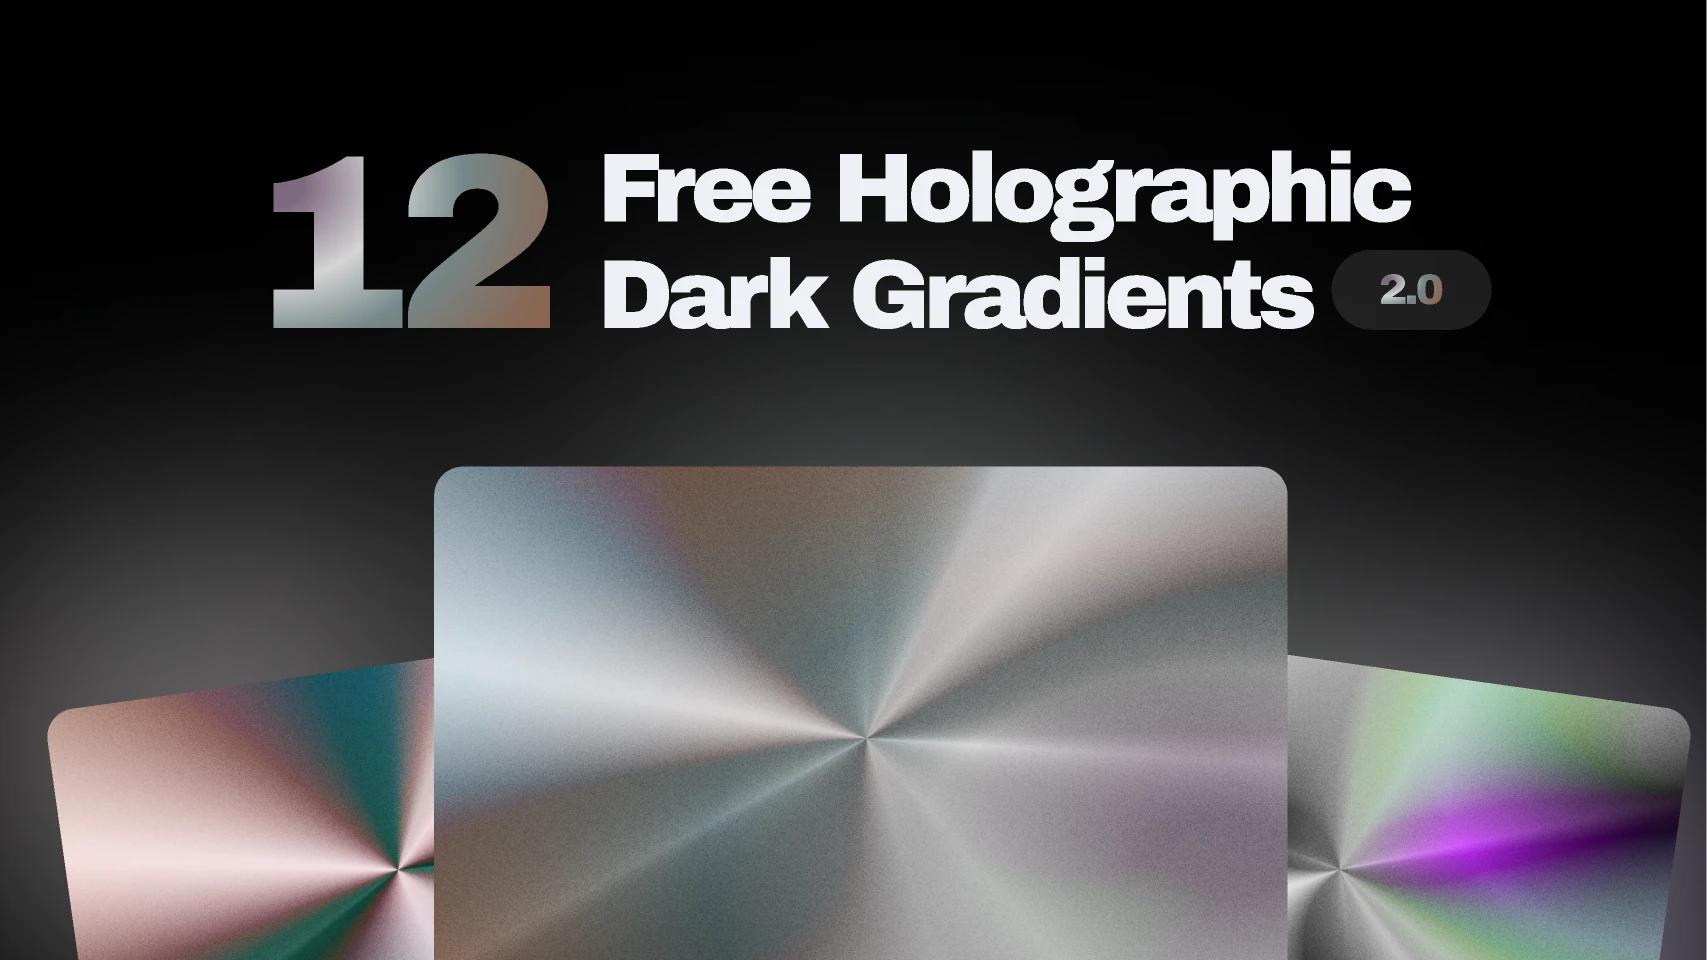 12 Free Holographic Dark Gradients 2.0 for Figma and Adobe XD